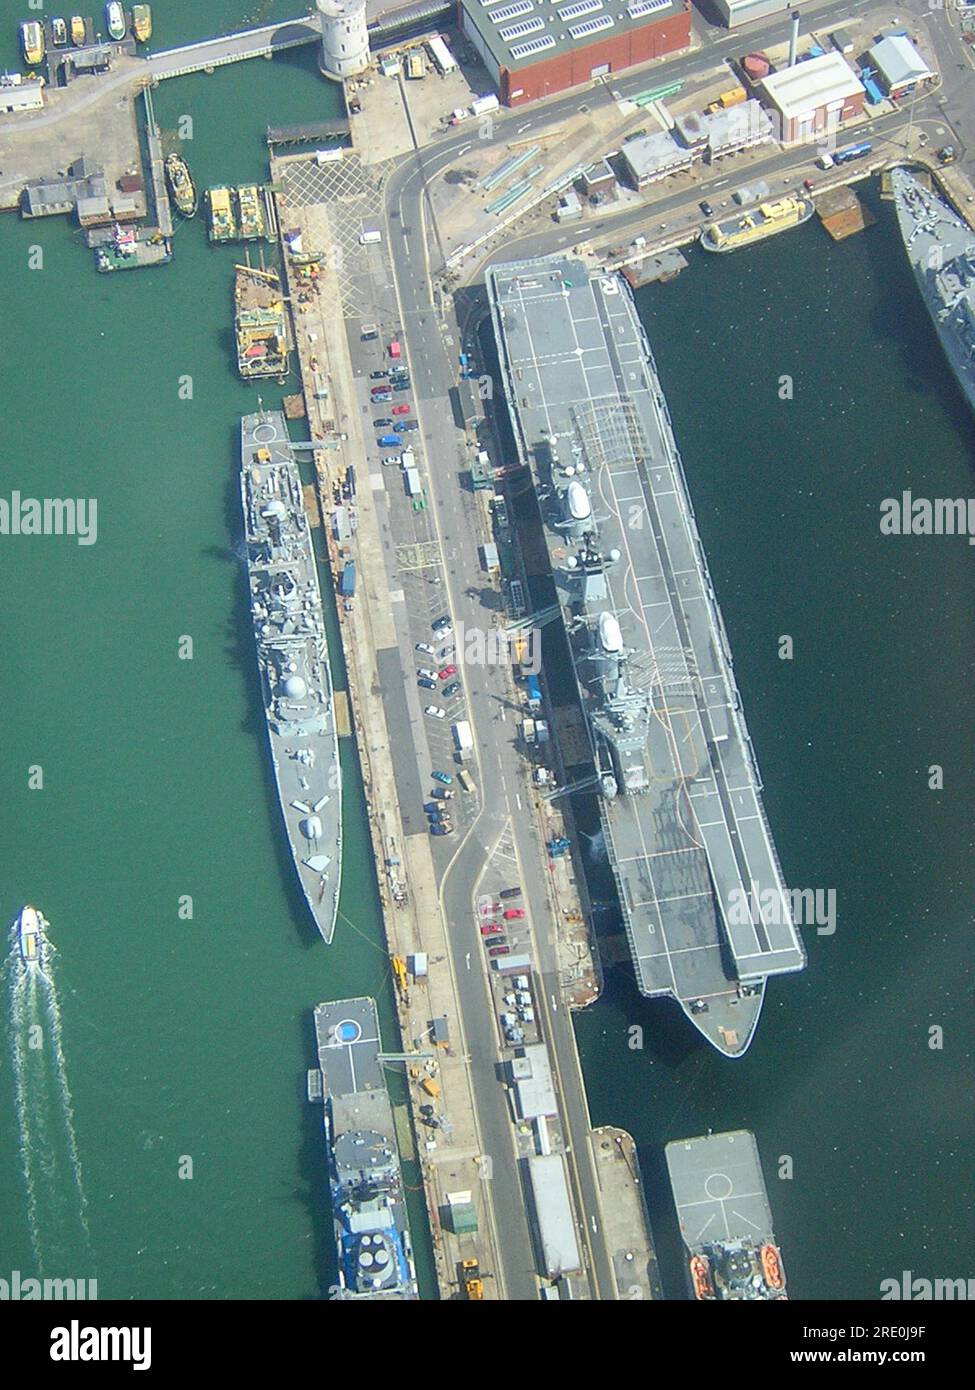 Aerial view looking down on His Majesty's Naval Base, Portsmouth (HMNB Portsmouth) with warships and HMS Ark Royal aircraft carrier. Stock Photo